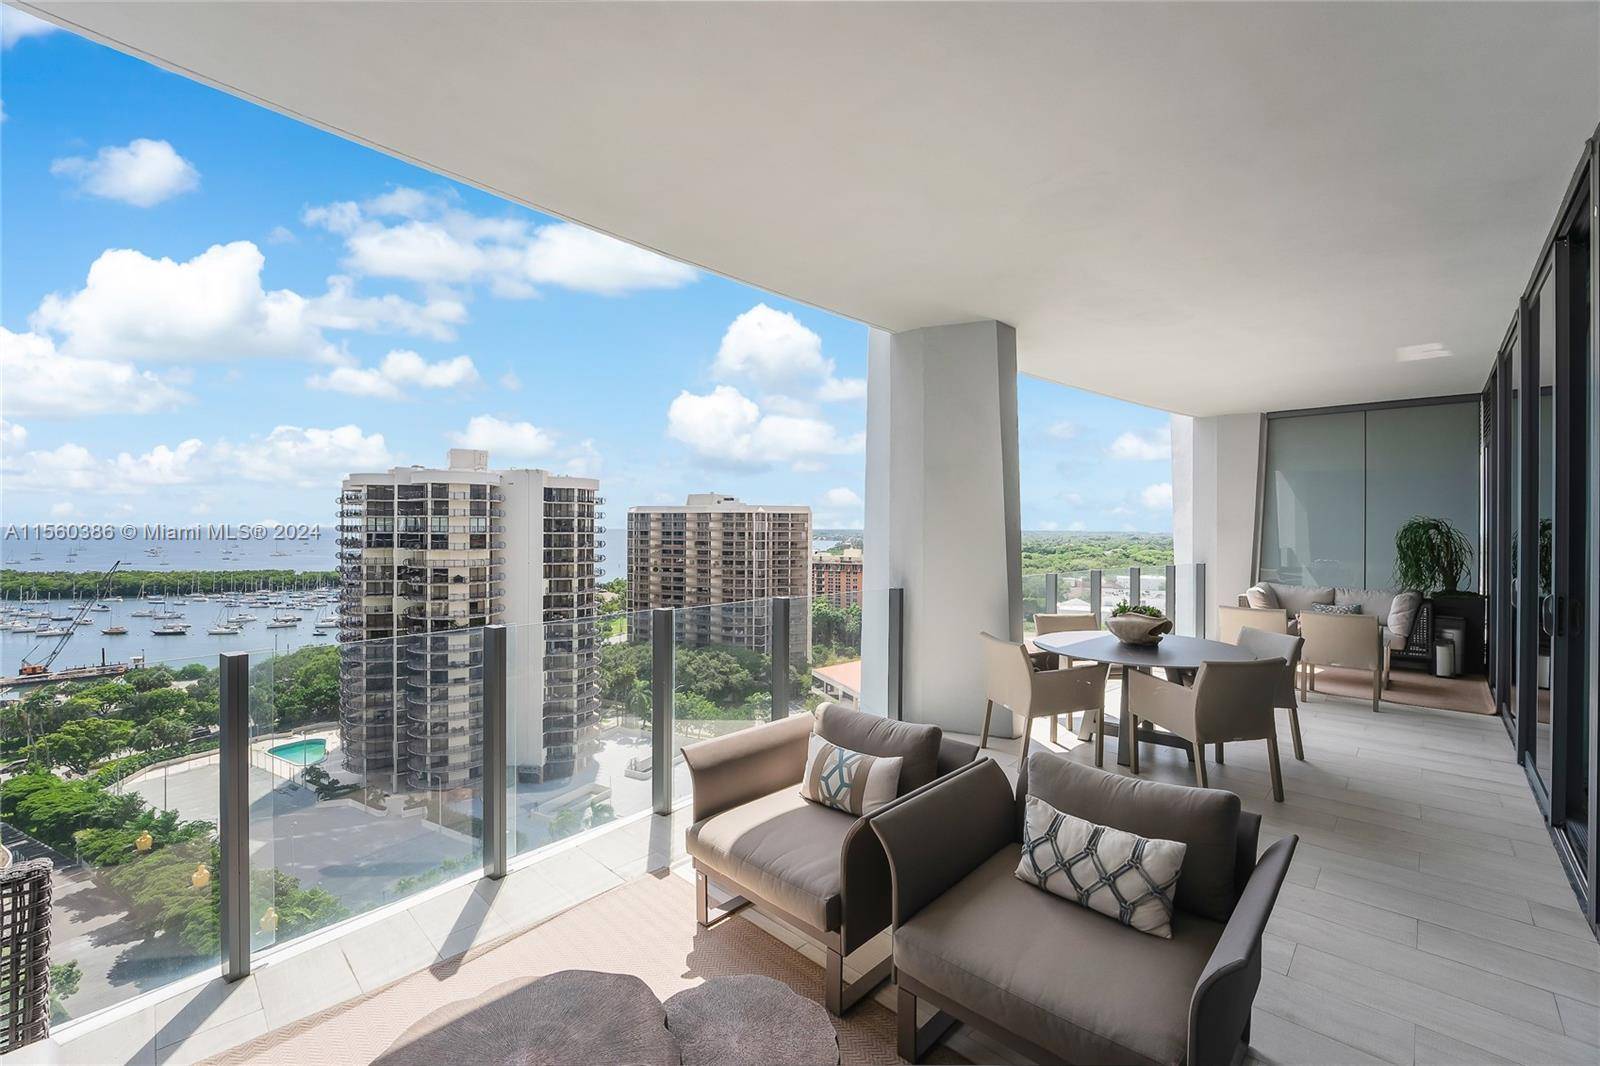 Furnished, turn key 2 Bed Den, 2 Bath condo with spectacular water views situated on the 15th floor in Tower 3 at Park Grove located in the most sought after ...